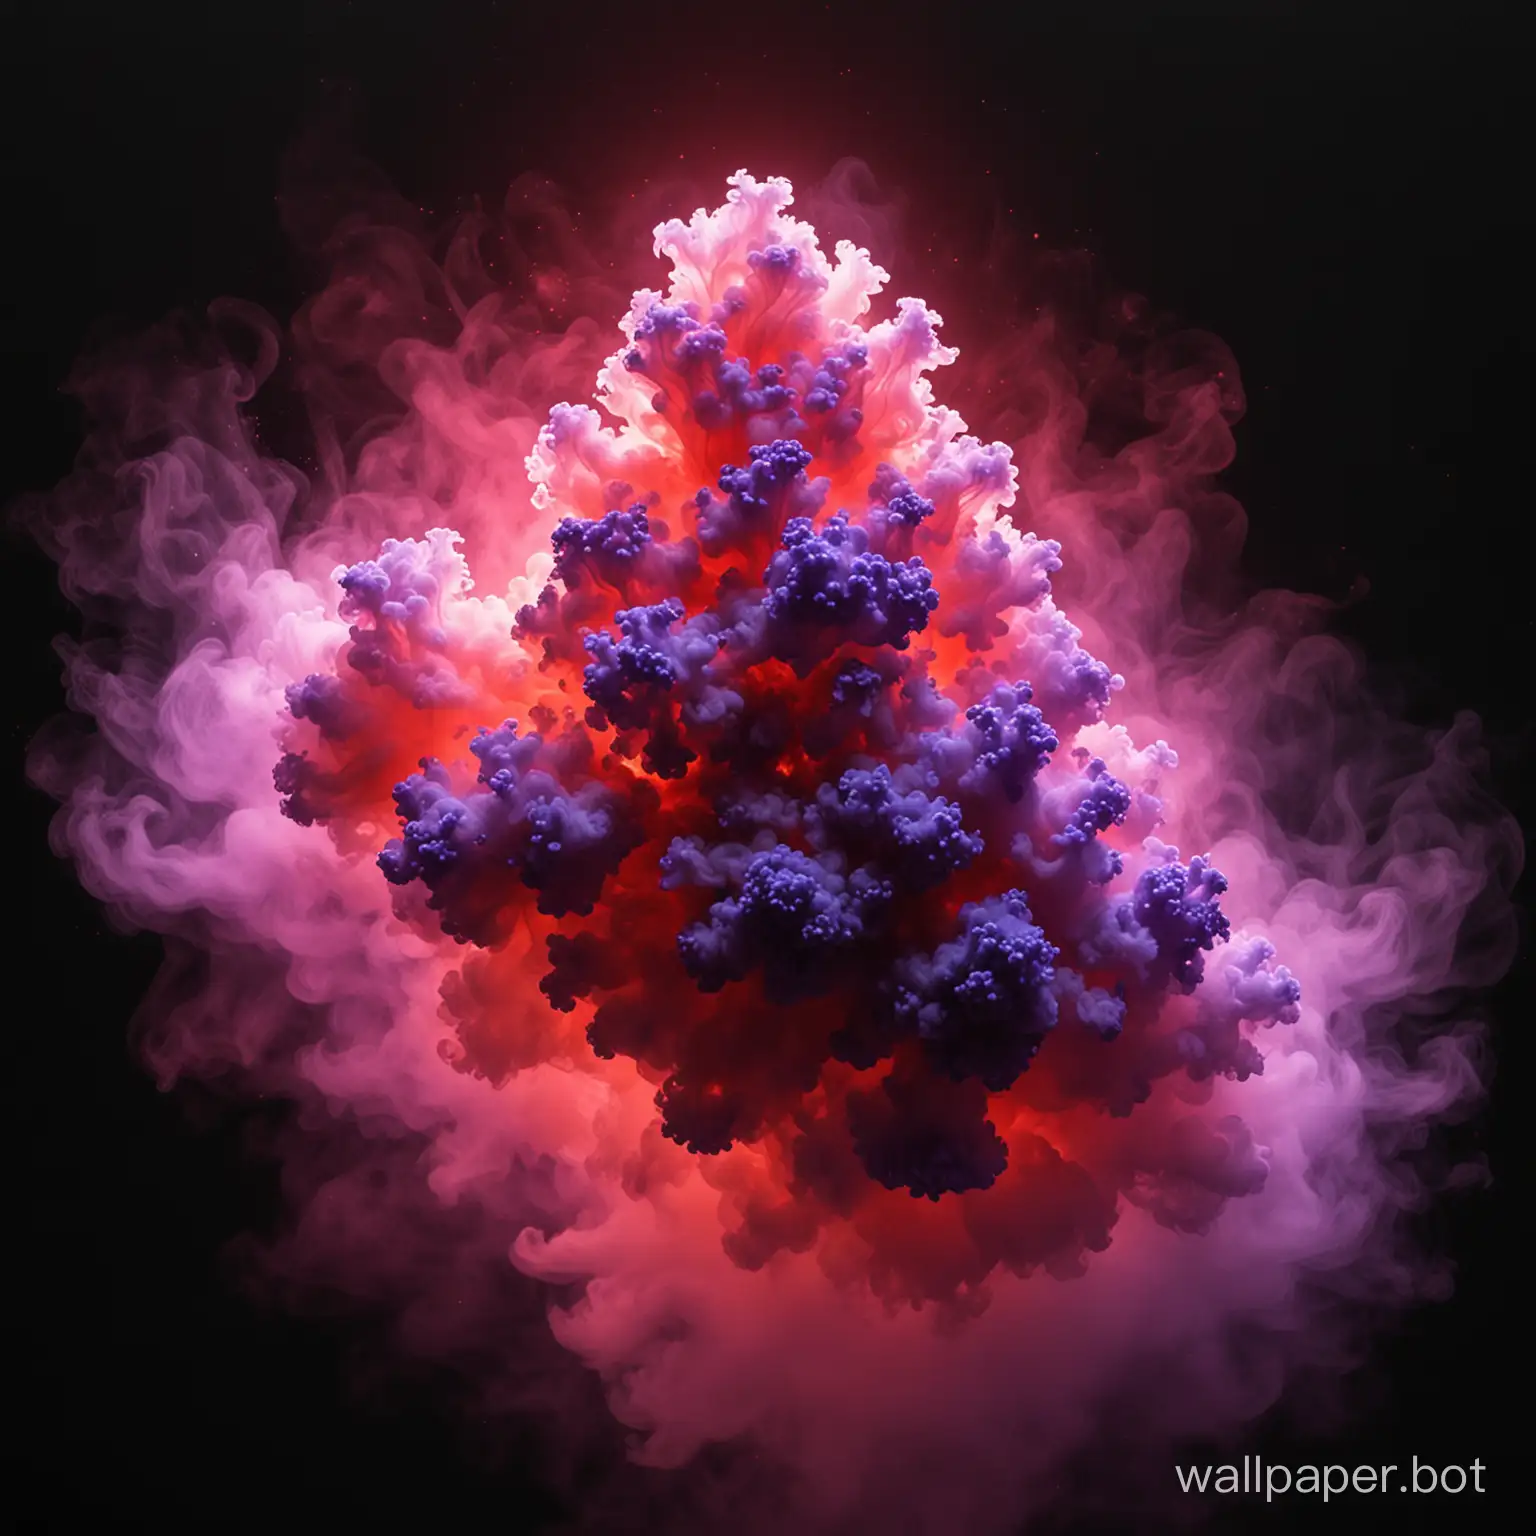 draw a violet cluster of mist, surrounded by red light on a black background